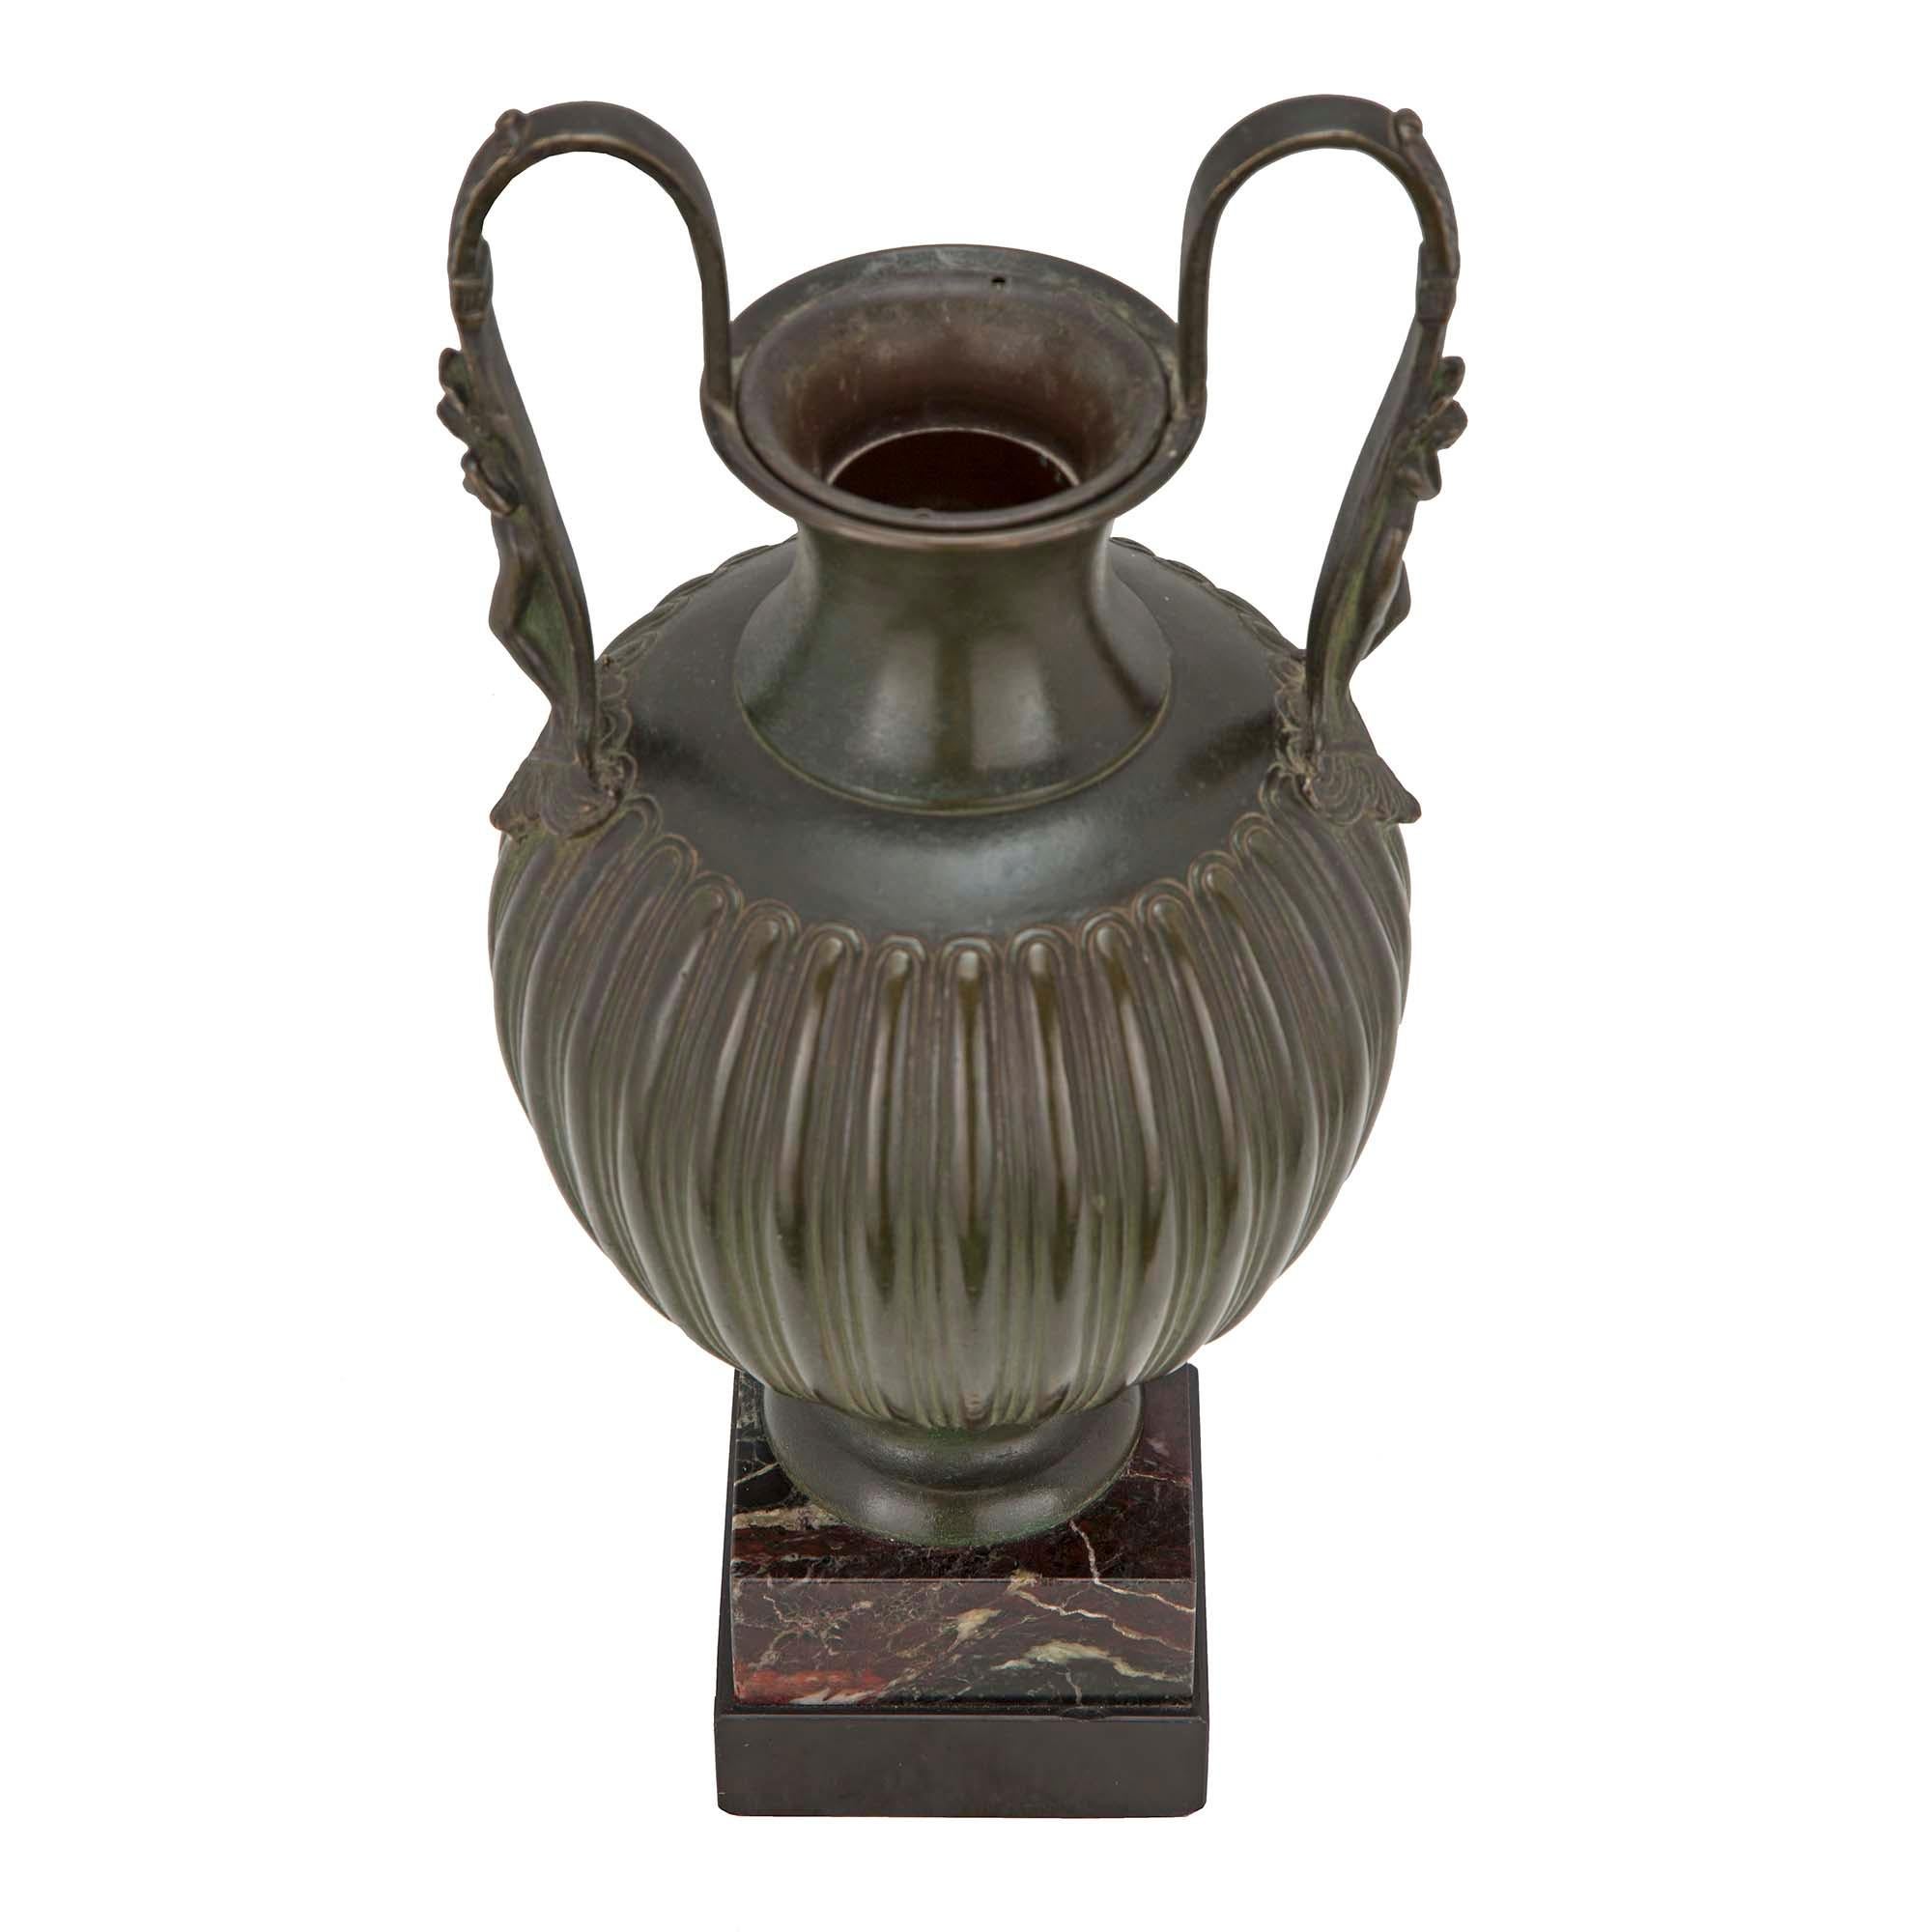 A very handsome French 19th century neo-classical patinated verdigris bronze urn. The urn is raised on a square marble base. The handsome patinated verdigris bronze urn has a reeded baluster shape. At each side are elegant handles with acanthus leaf